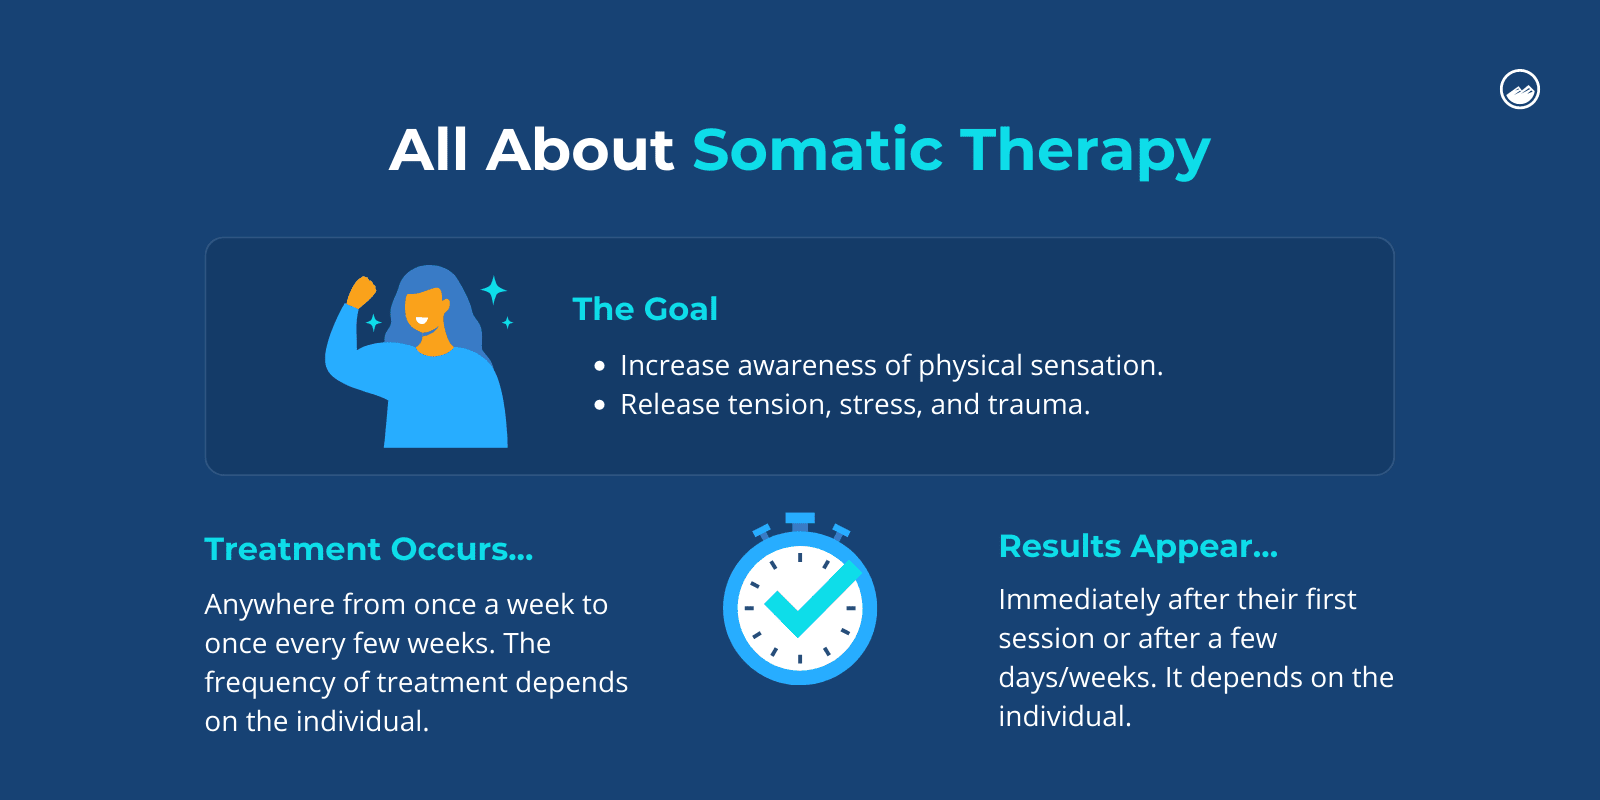 All about Somatic Therapy Infographic